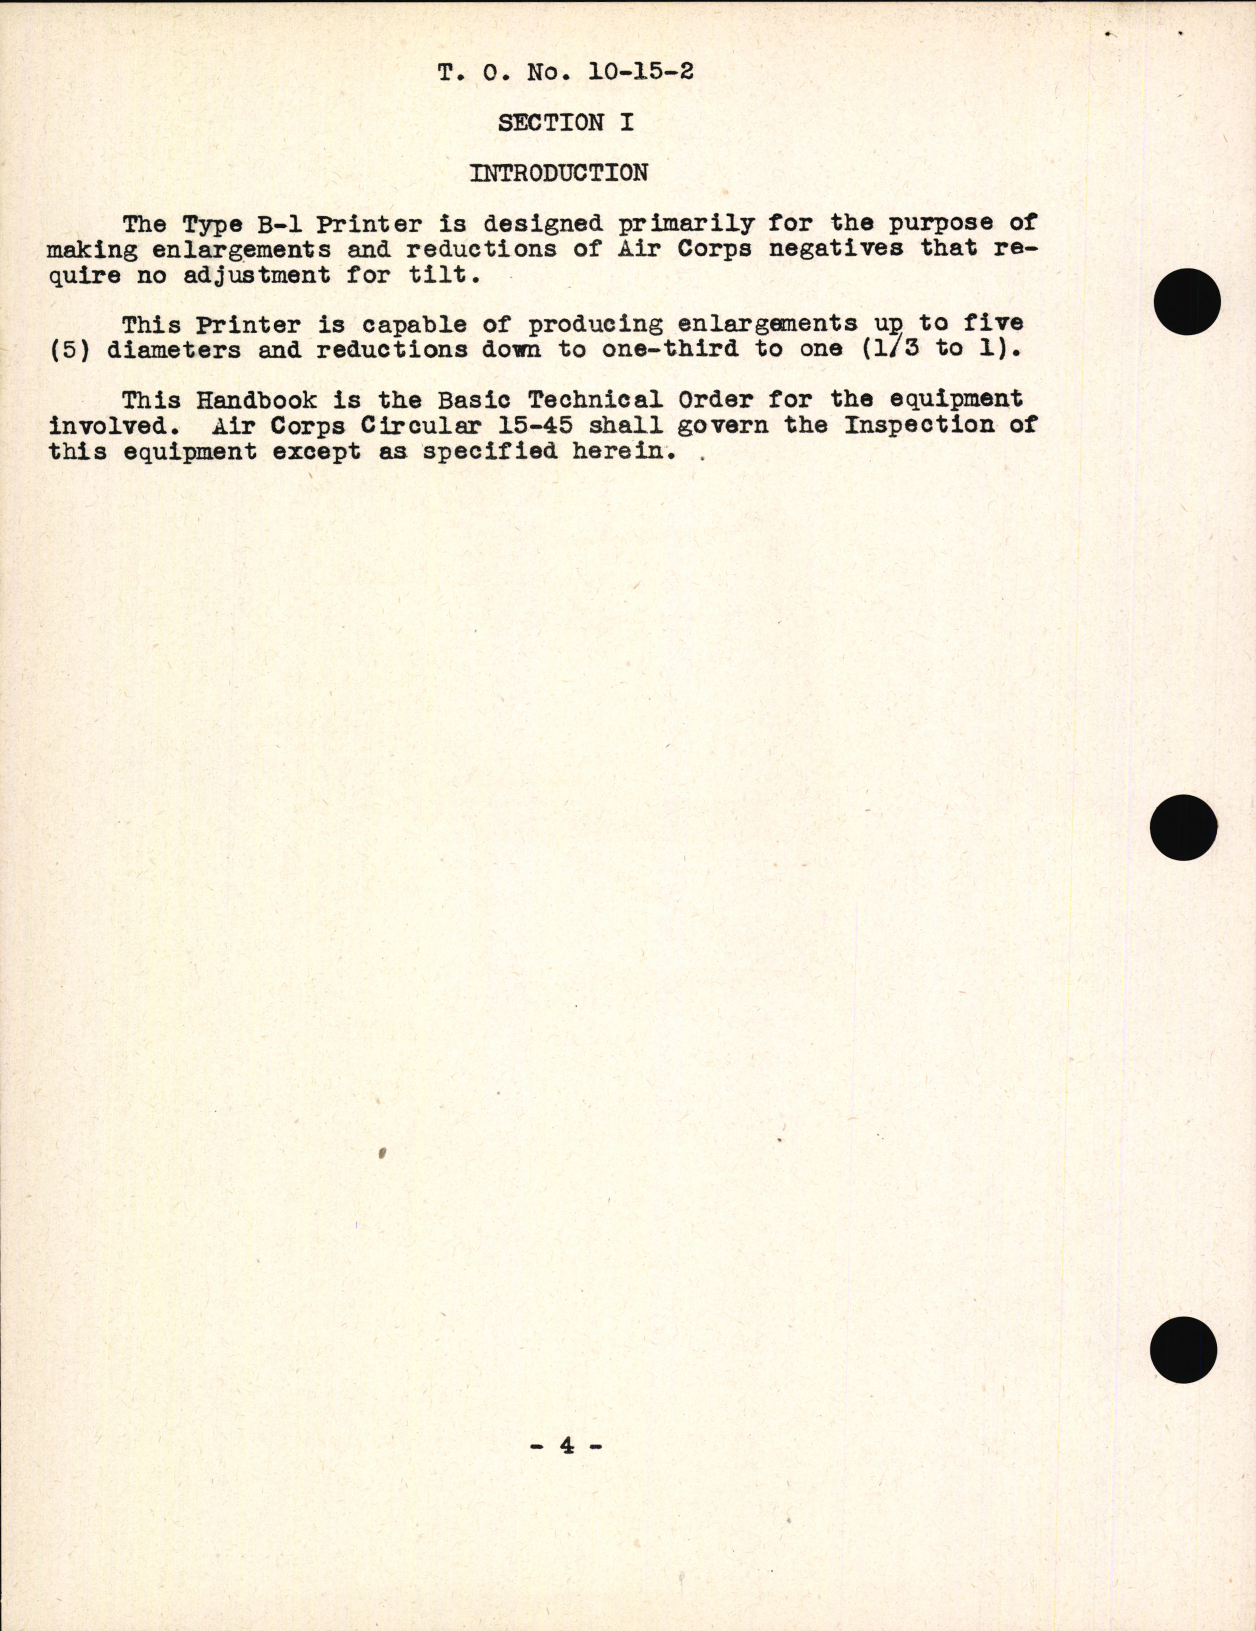 Sample page 6 from AirCorps Library document: Handbook of Instructions for Type B-1 Projection Printer